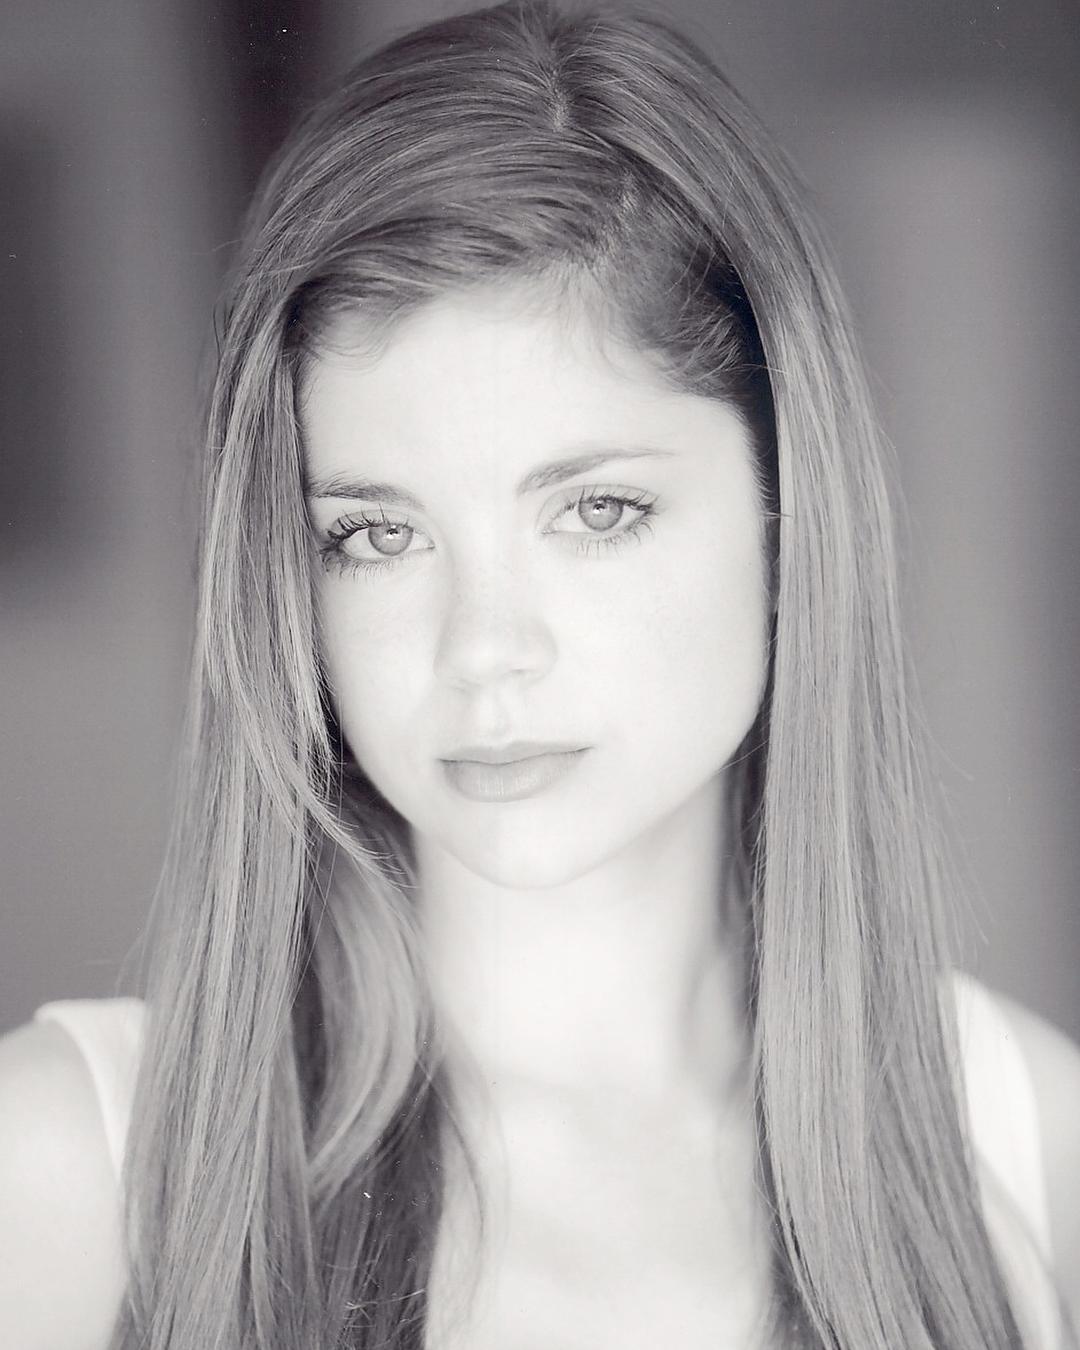 49 Hot Pictures Of Charlotte Hope Will Get You Hot Under Your Collars | Best Of Comic Books